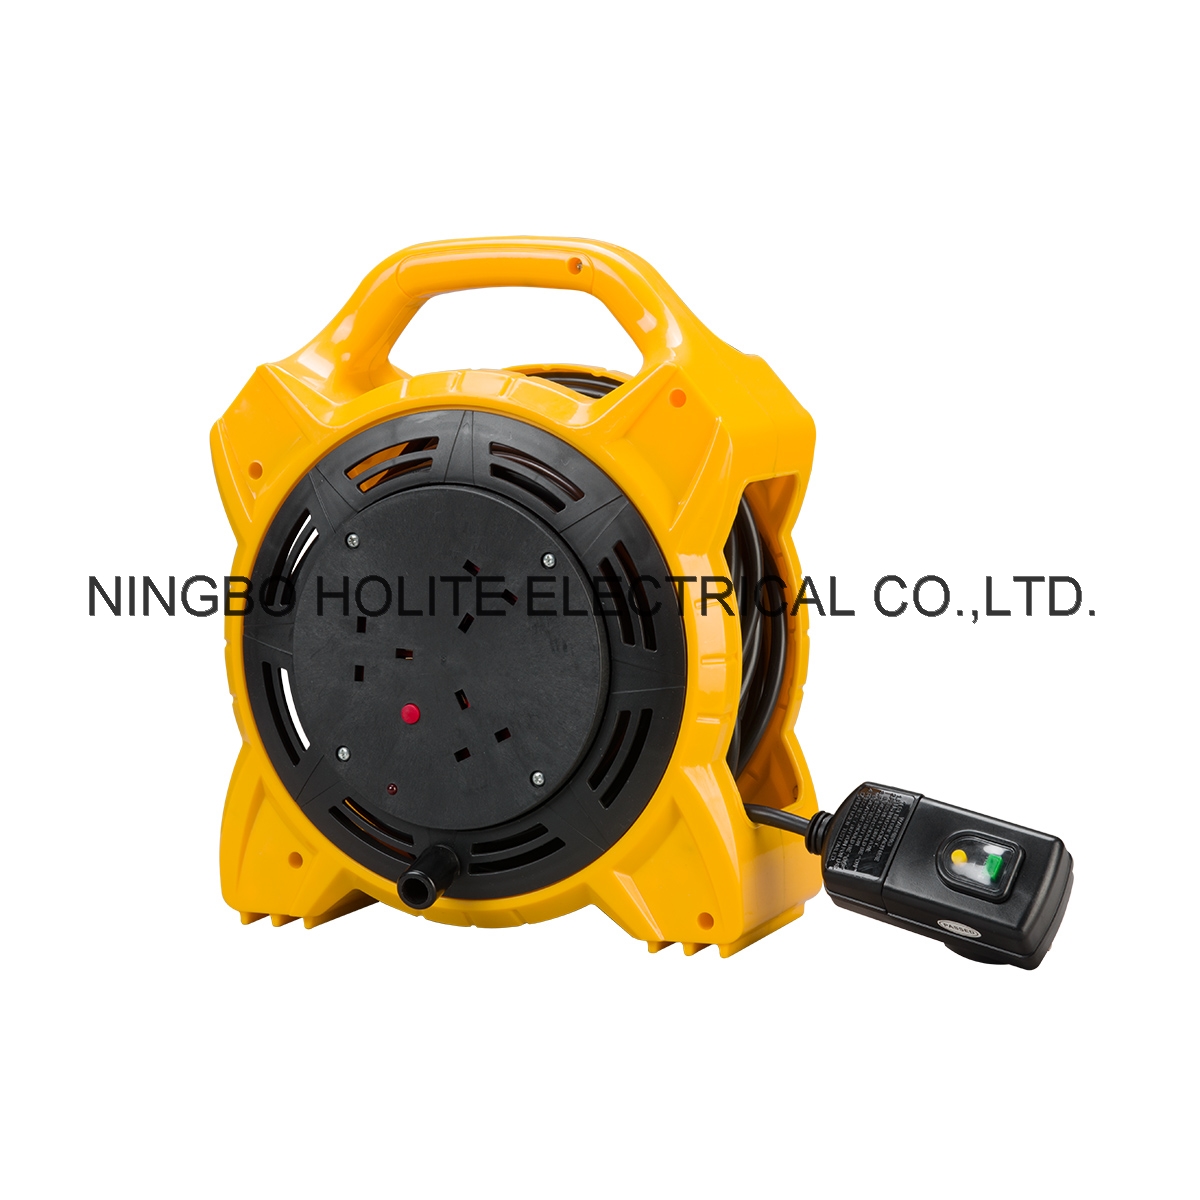 Innovative Multi-function Cable Reel With LED Light-BS Plug DIY Market